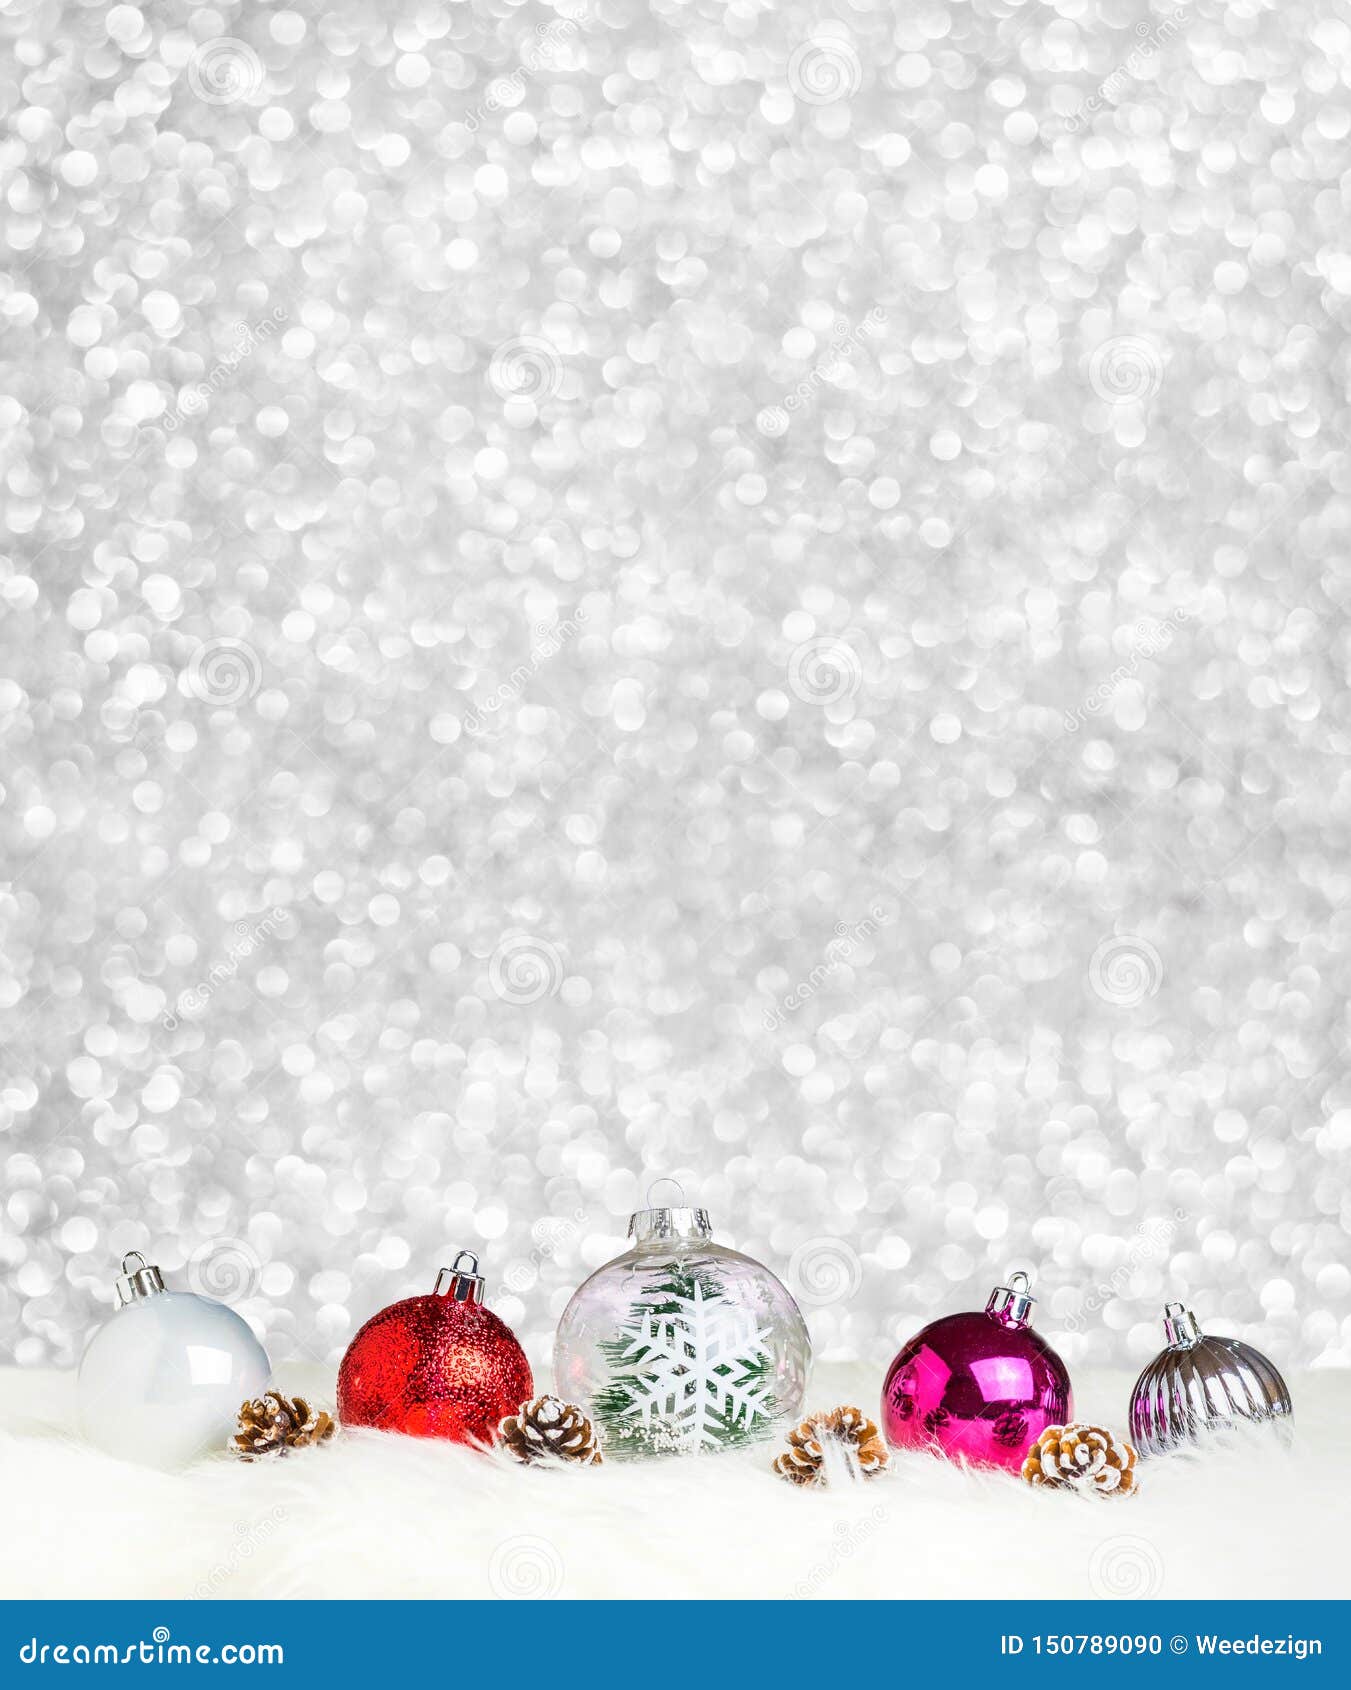 merry christmas decoration ball on white fur at silver bokeh light background,banner vertical holiday greeting card